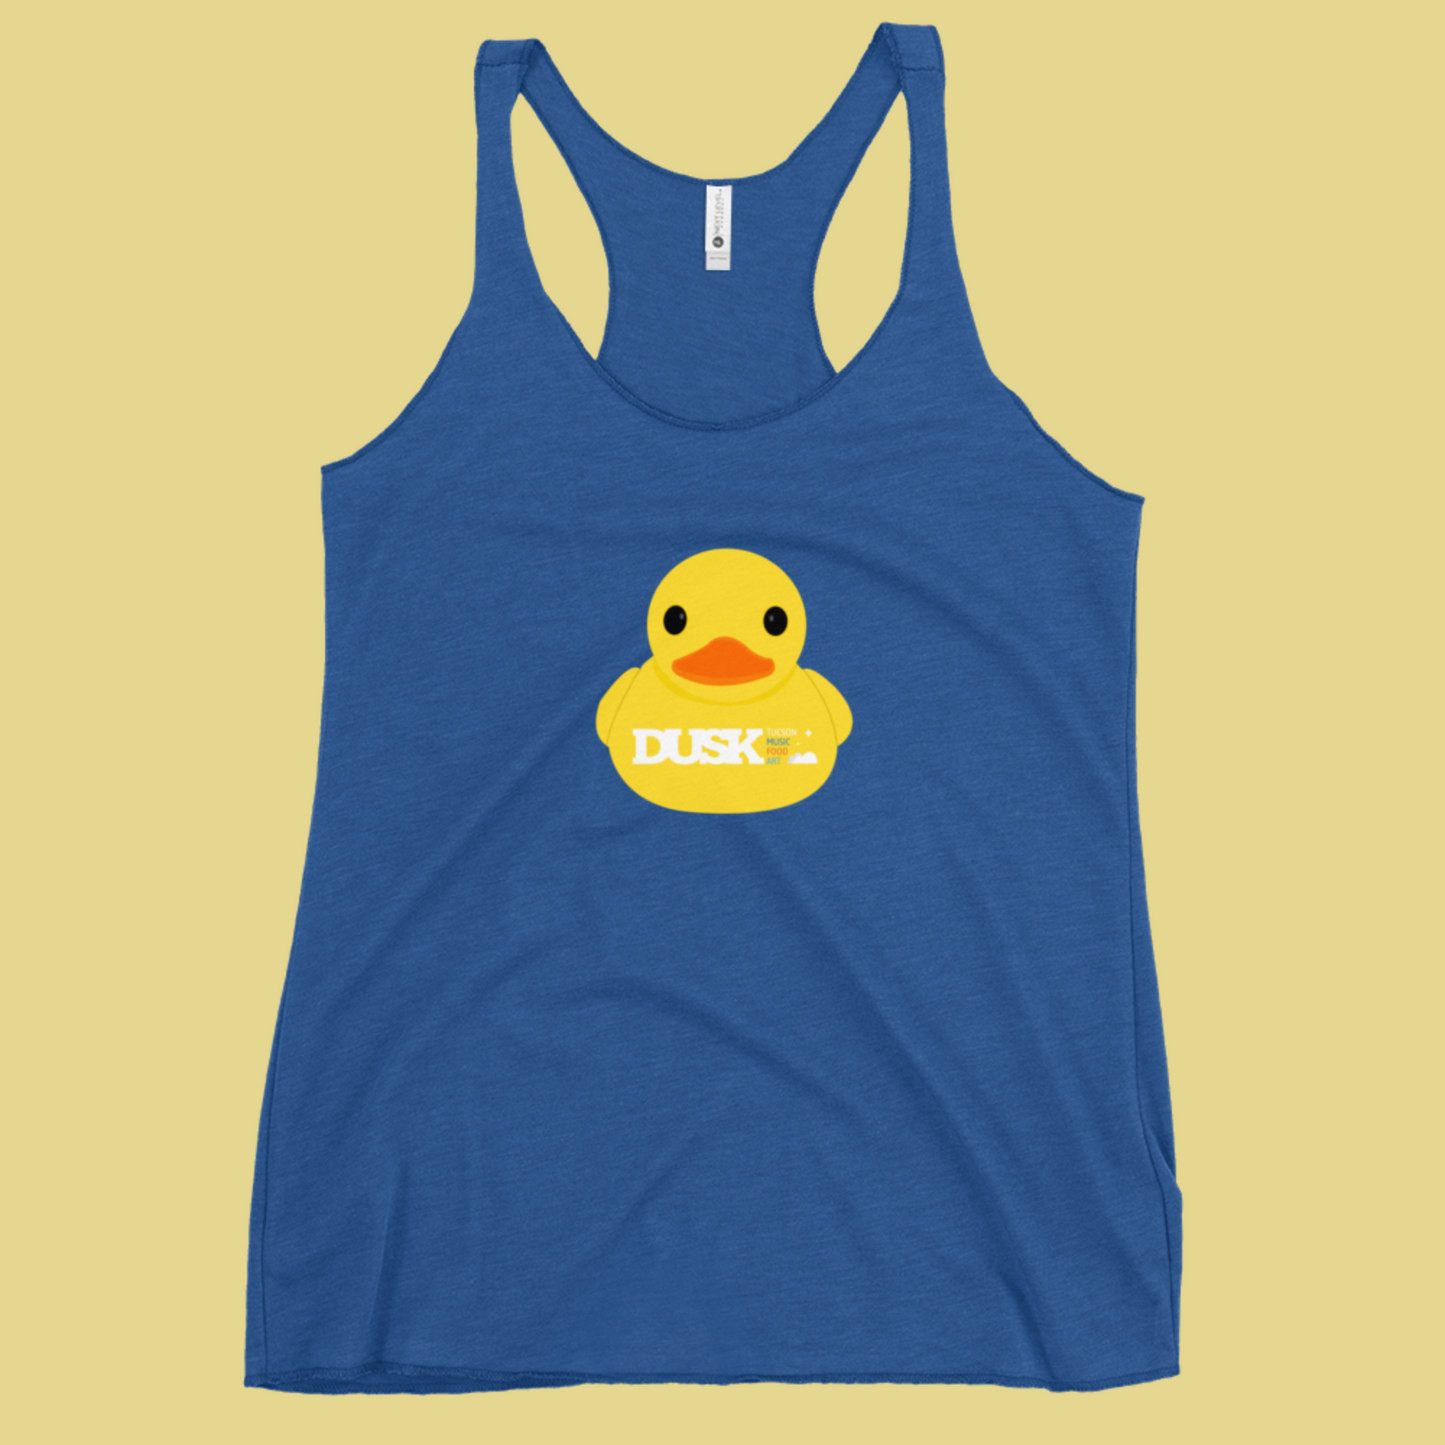 Rubber Duckie, You're the One - Racerback Tank